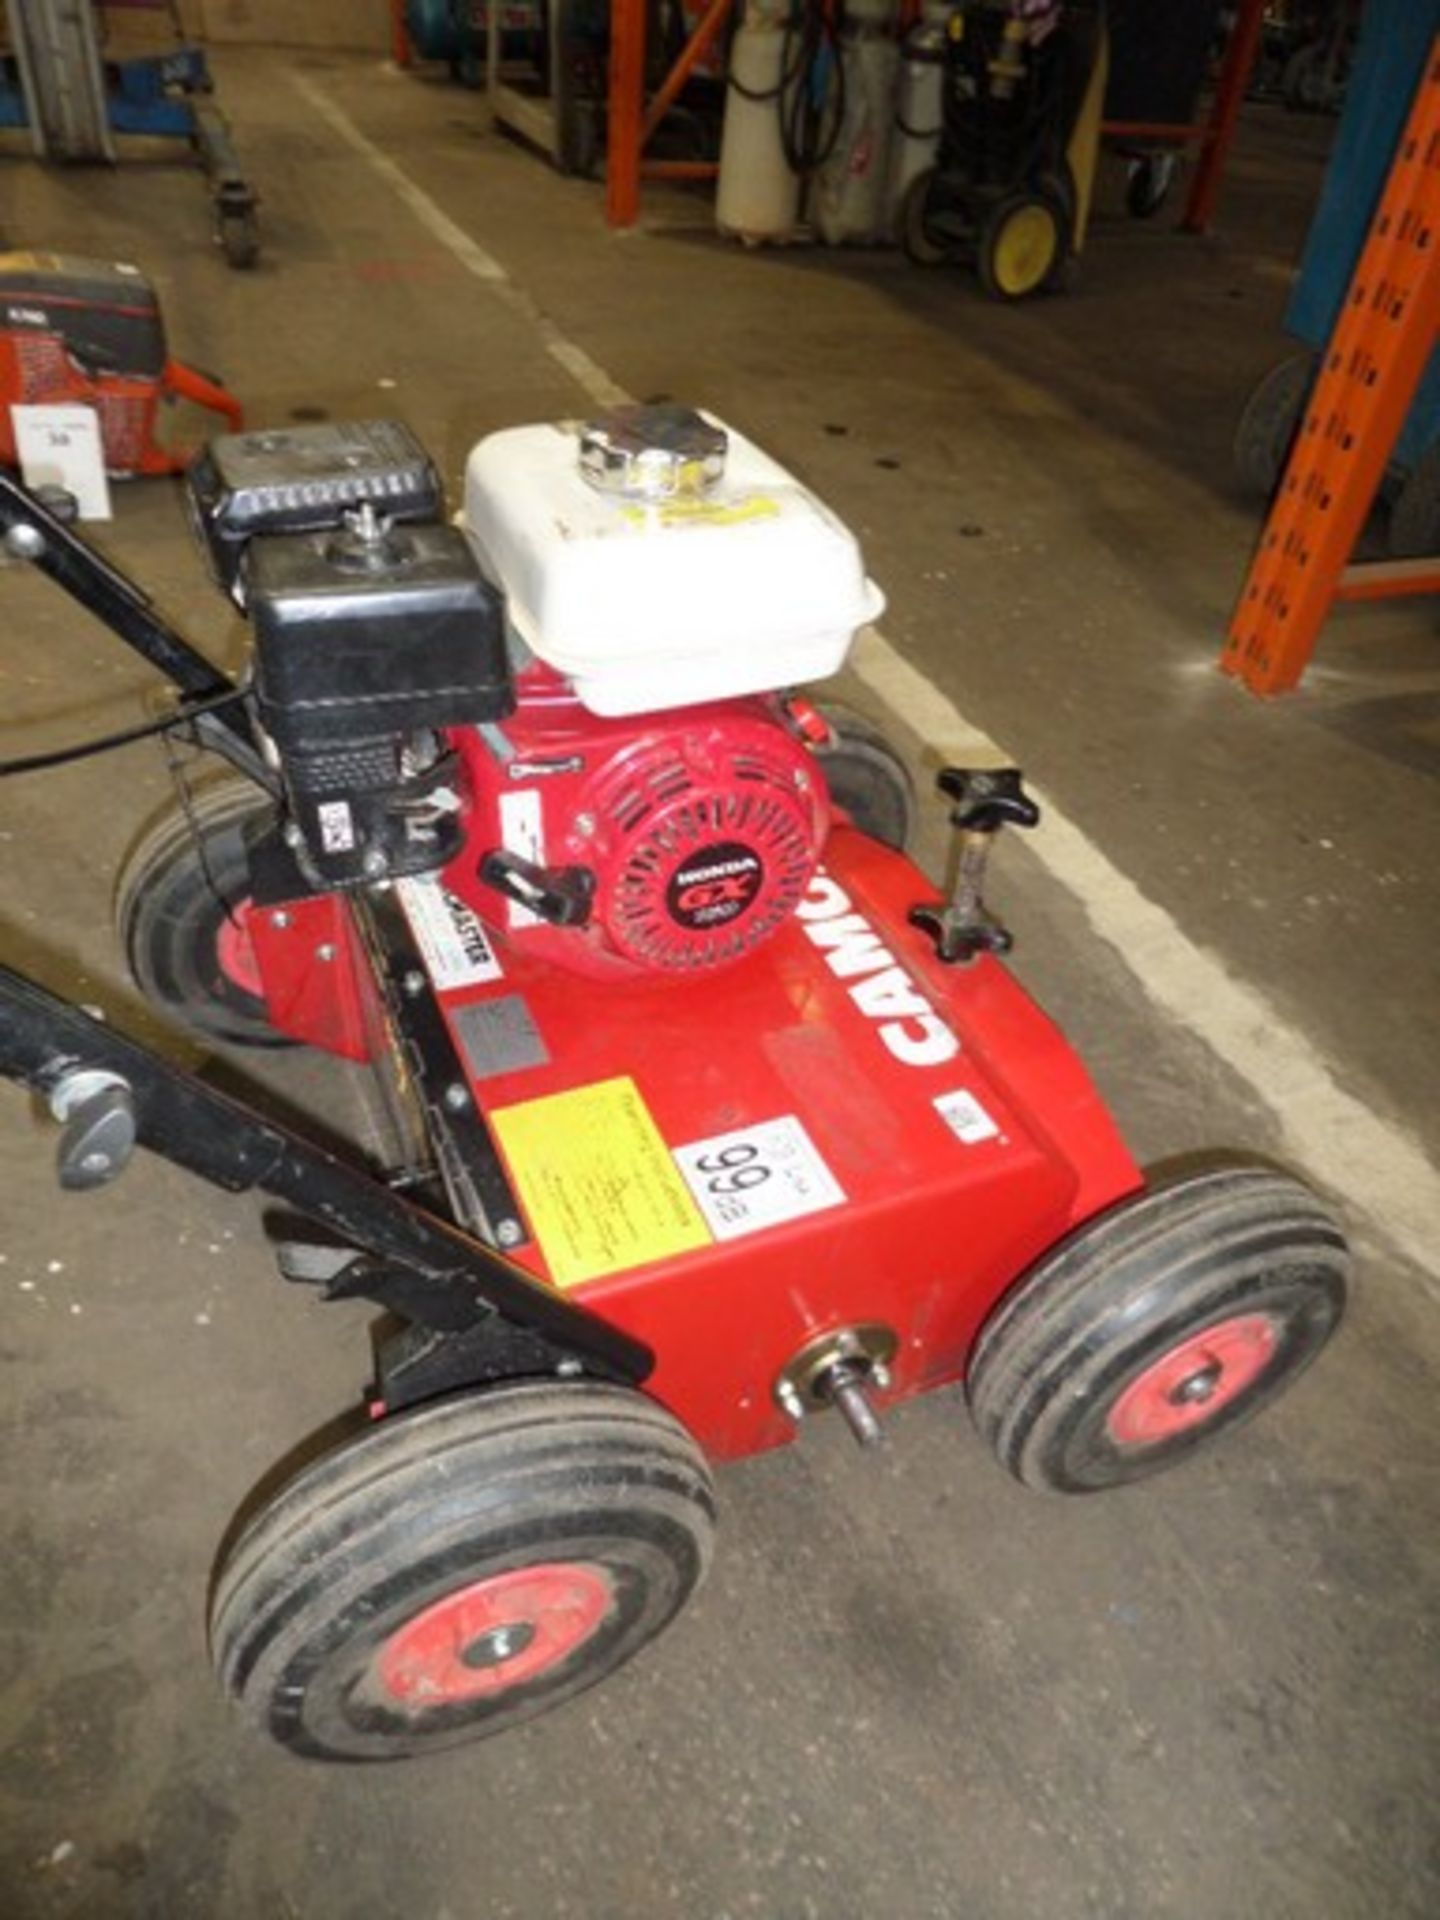 CAMON  {014986} Petrol Lawn Scarifier Petrol powered by Honda GX160 engine and is working fine but - Image 2 of 2